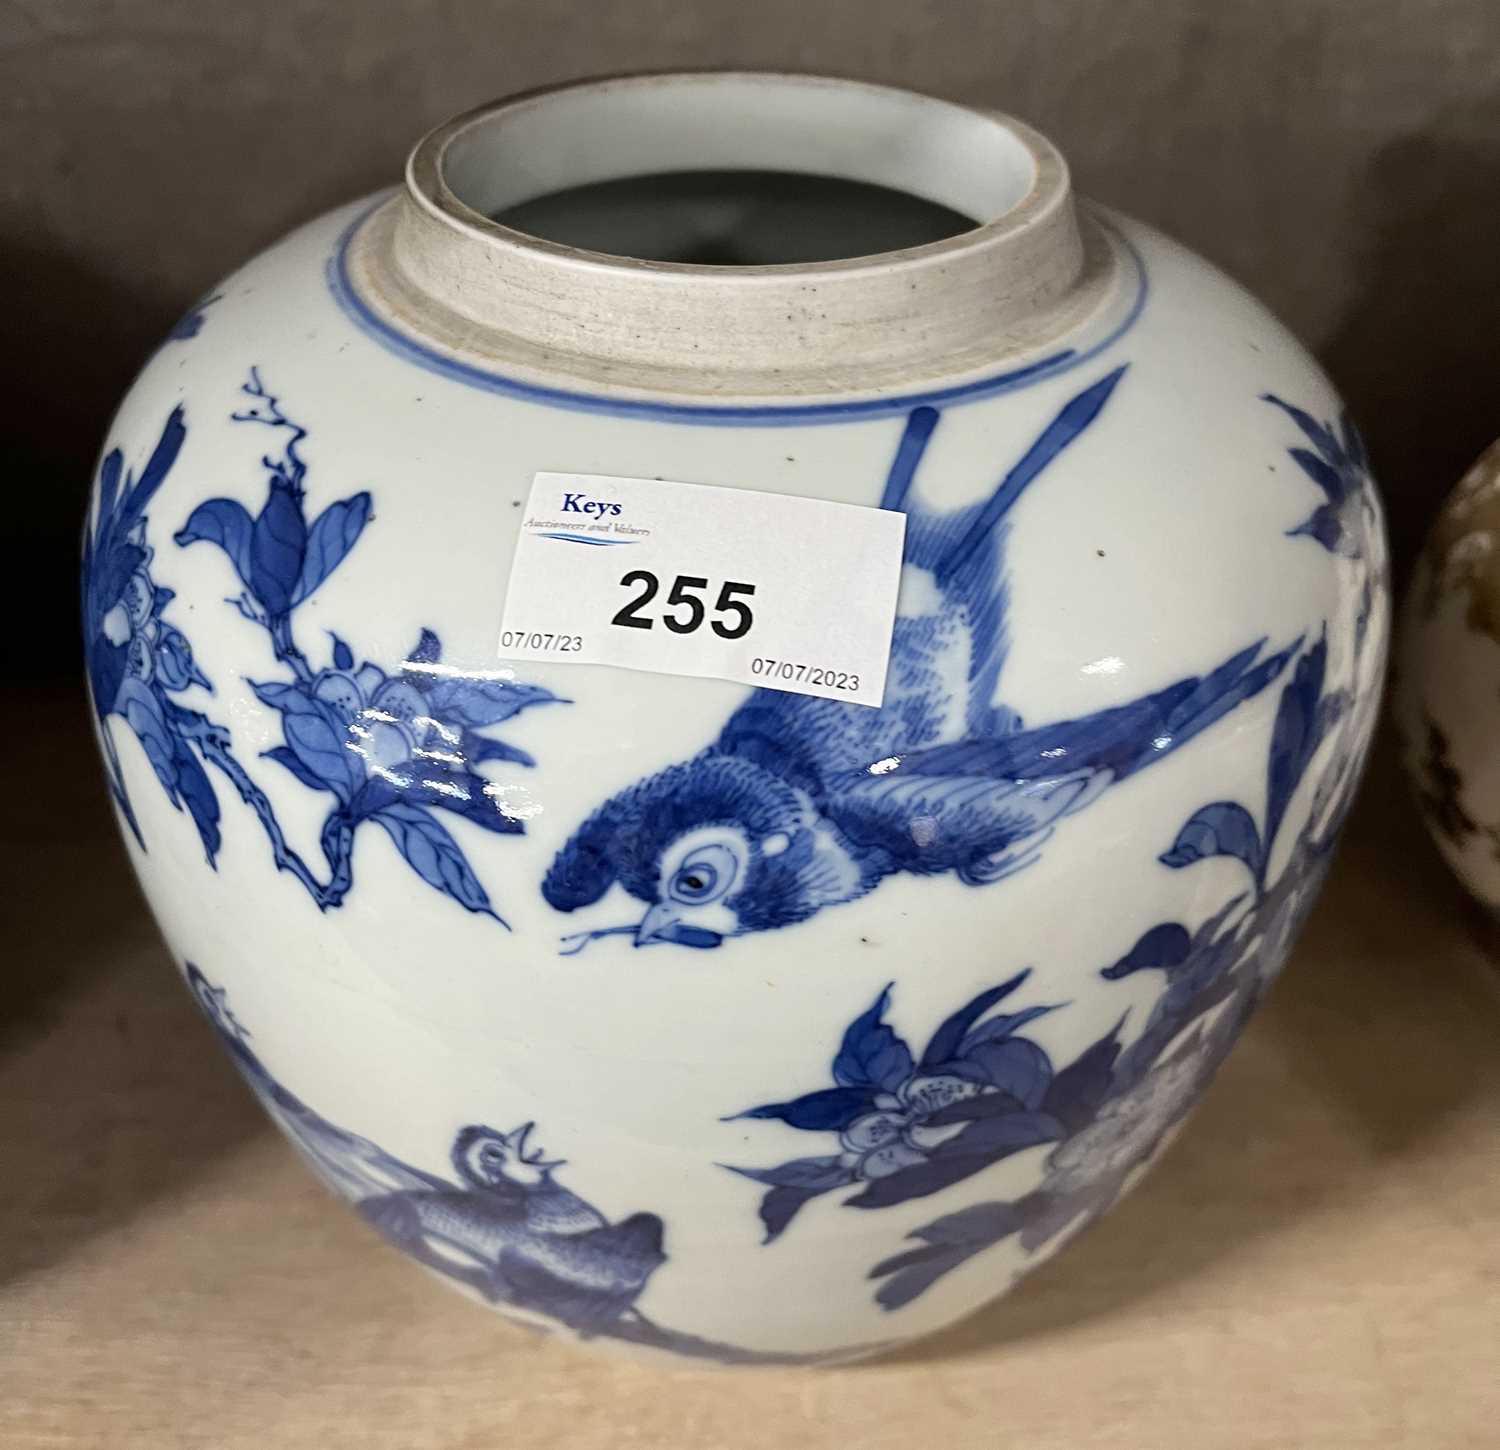 Qing Dynasty Chinese porcelain ginger jar (lacking cover), decorated in blue and white with birds on - Image 8 of 9